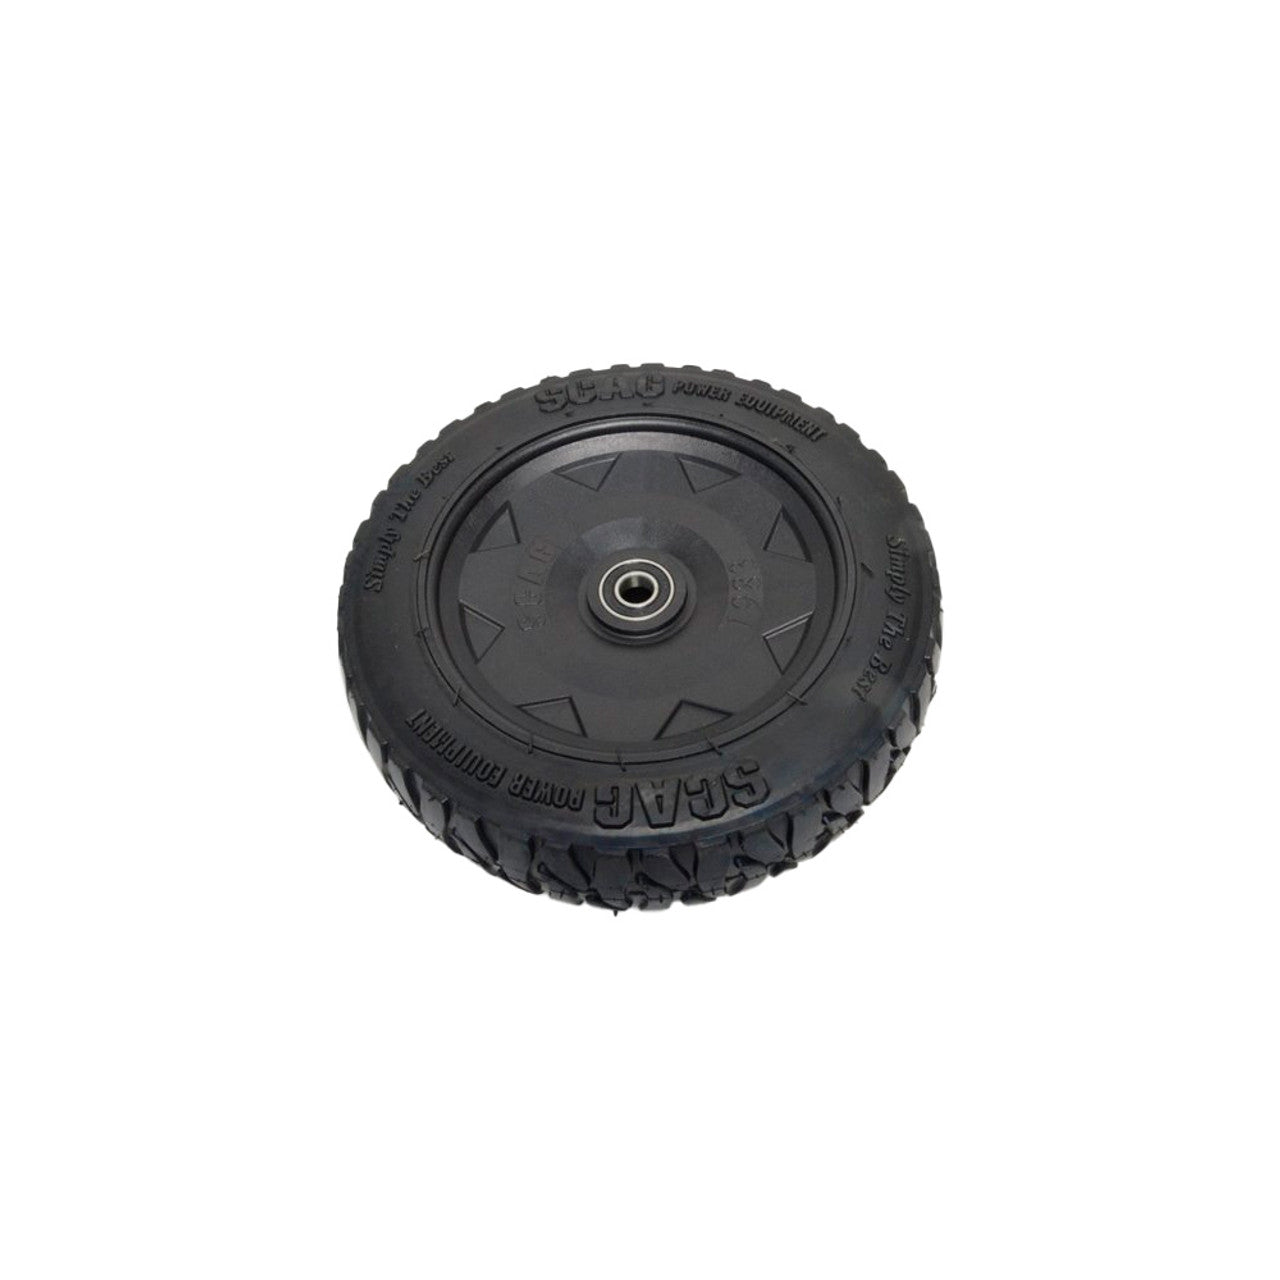 SCAG SFC-30 FRONT WHEEL ASSEMBLY 486702 Buy SCAG SFC 30 parts. Australia-wide delivery of SCAG SFC 30 parts. SCAG SFC 30 parts at the best prices. Fast Delivery. We only sell what we have in stock. Shop now for your SCAG SFC 30 parts here at Mowermerch SCAG SFC 30 parts.